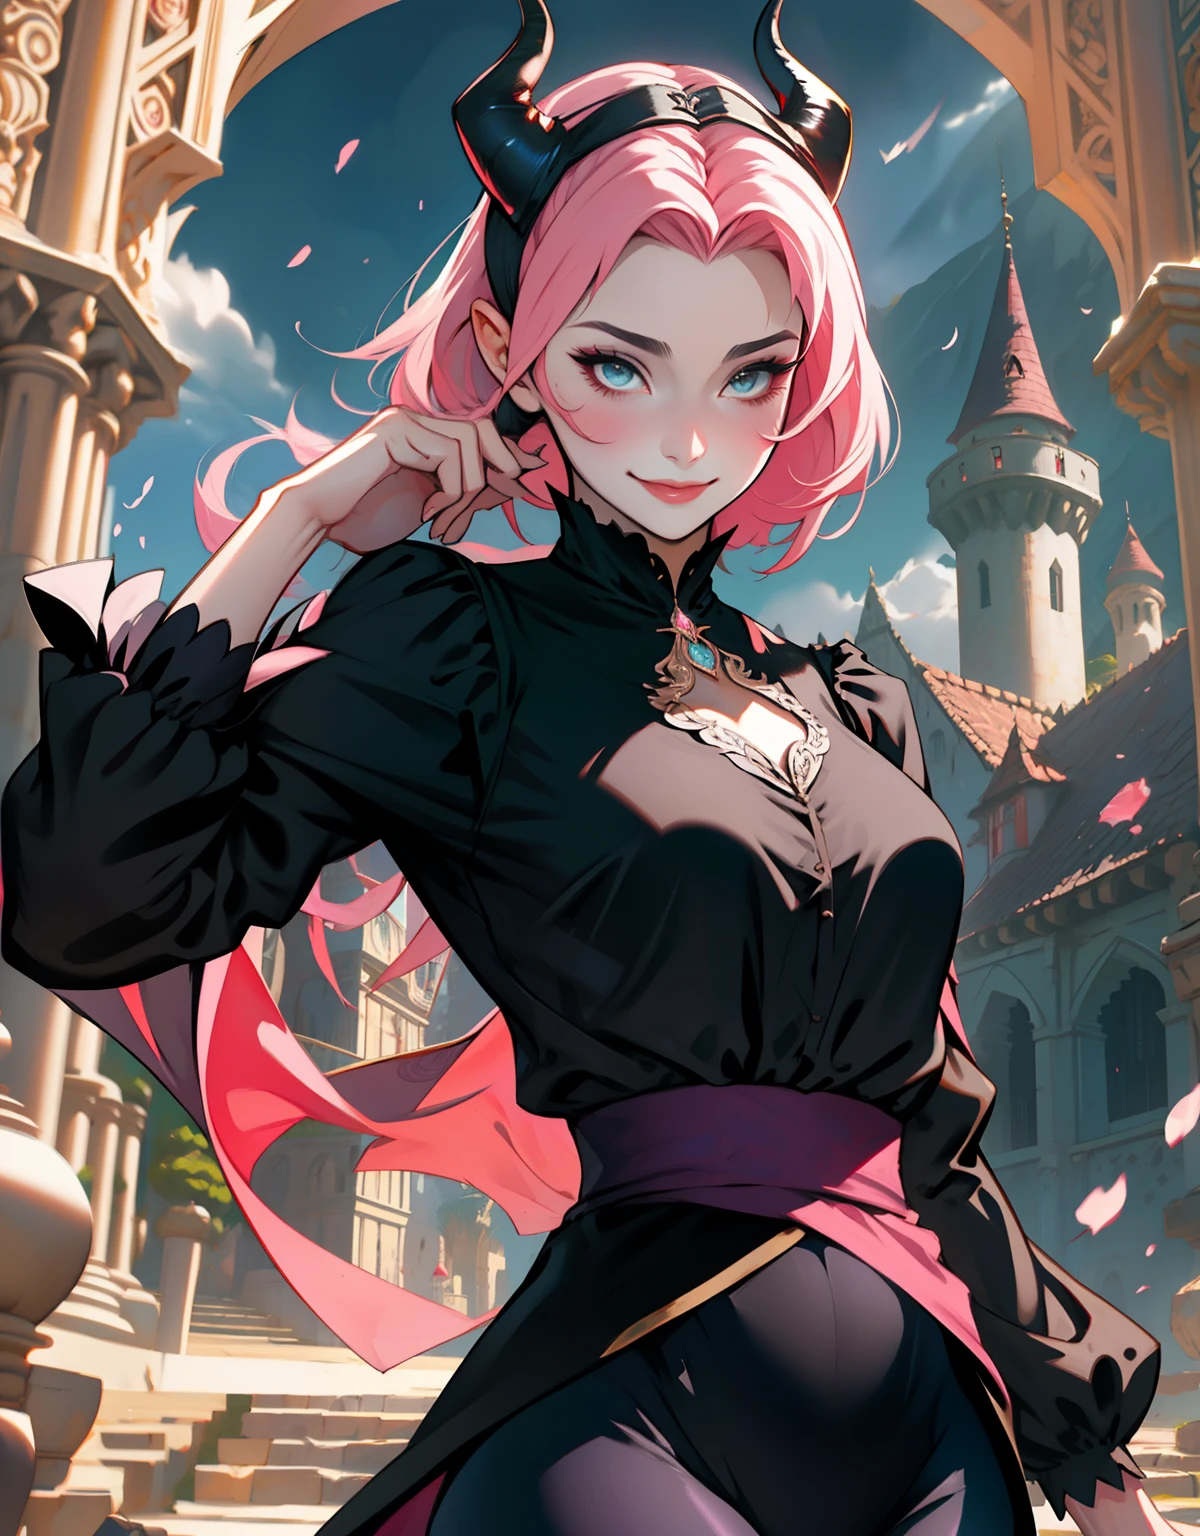 1womanl, dressed up as maleficent, strong emotions, sakura, shorth hair, (pink  hair!!) , Lumiere, focusing, how malevolent, fully body, horns on head, 独奏, magic around you, she is in front of a castle,(leggings and black blouse),  from head to toe ((fully body!!!), malignant, wicked face, evil smile